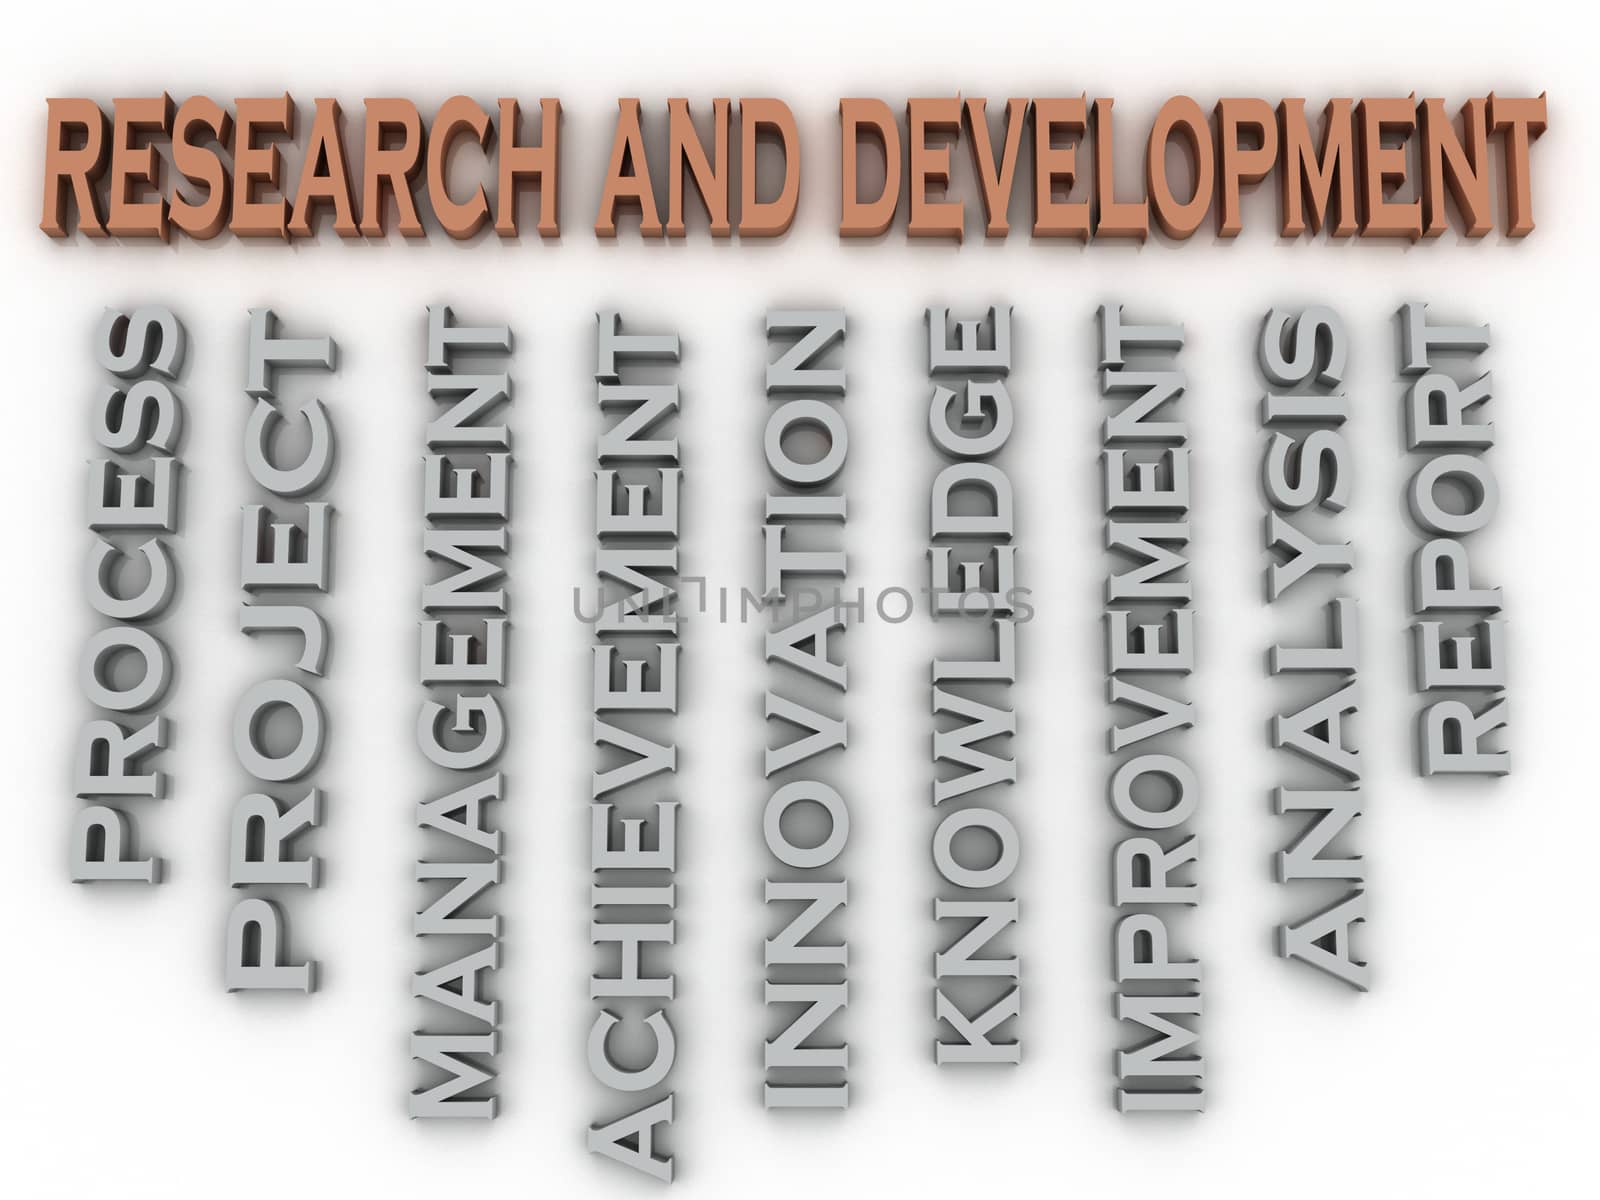 3d image research and development issues concept word cloud background